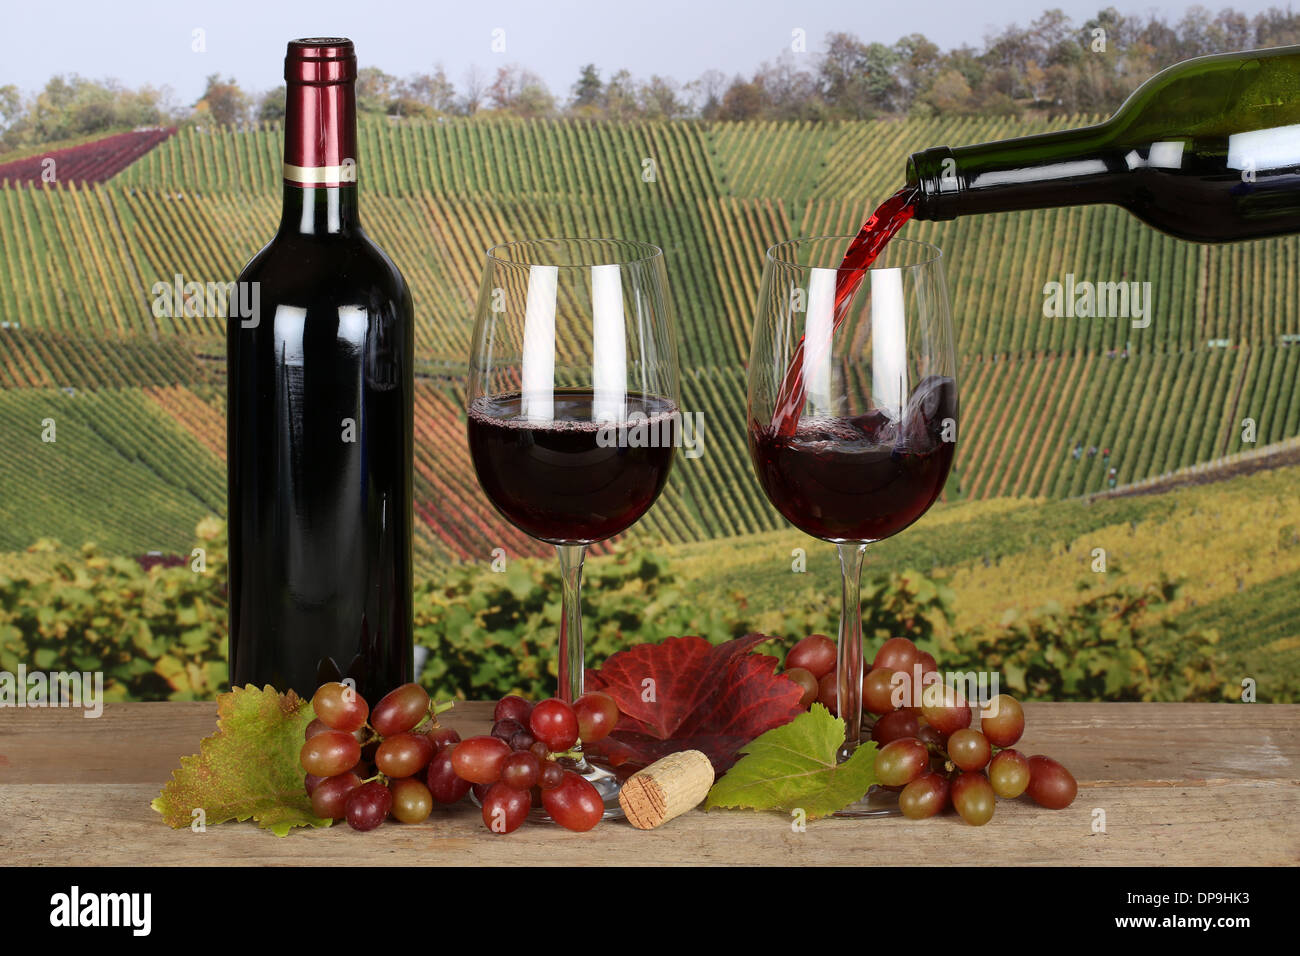 Red wine pouring from a bottle into a wine glass Stock Photo